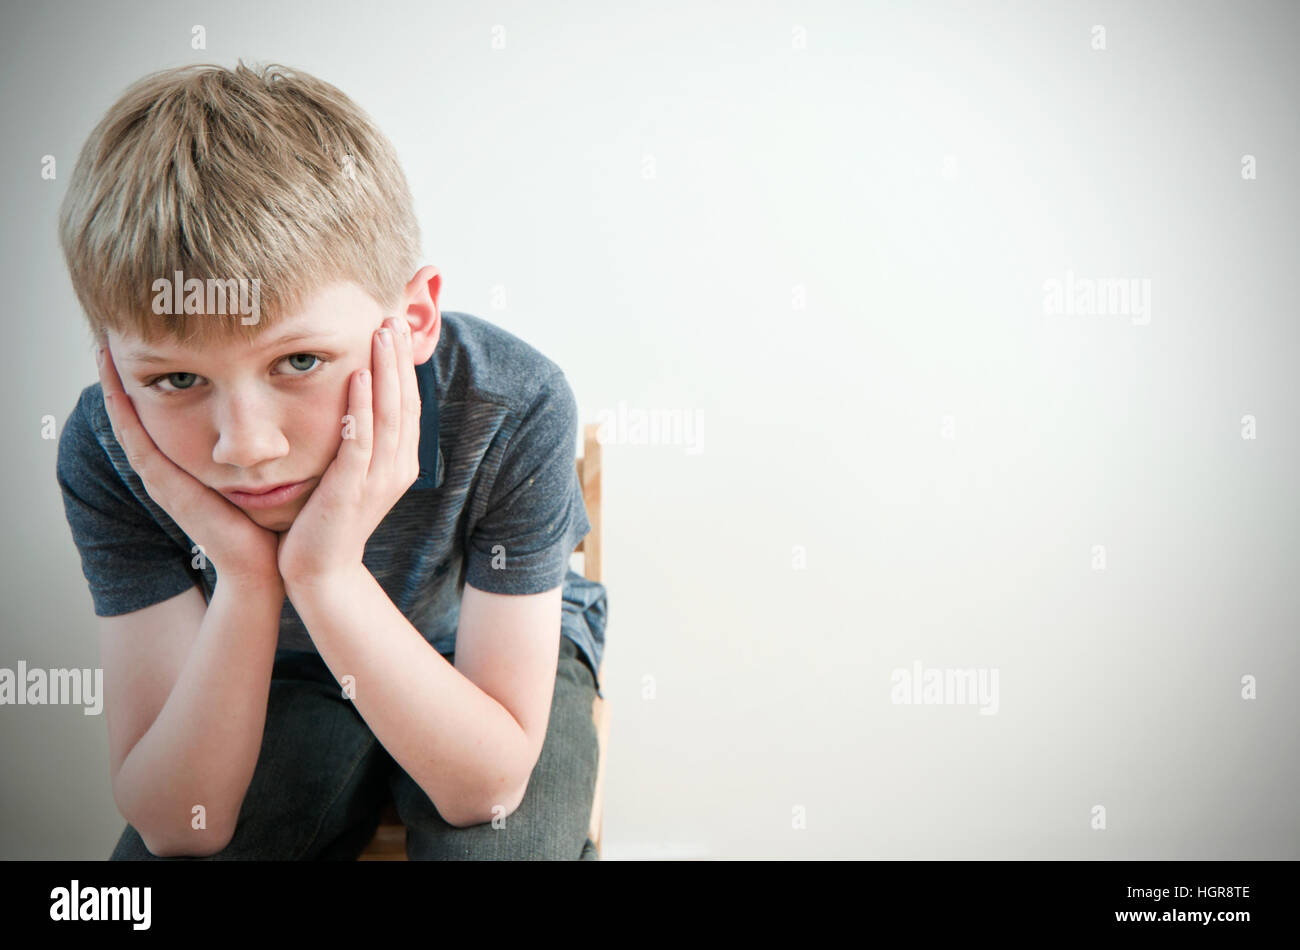 A sad and dejected young child against a plain background with copy space to the right Stock Photo